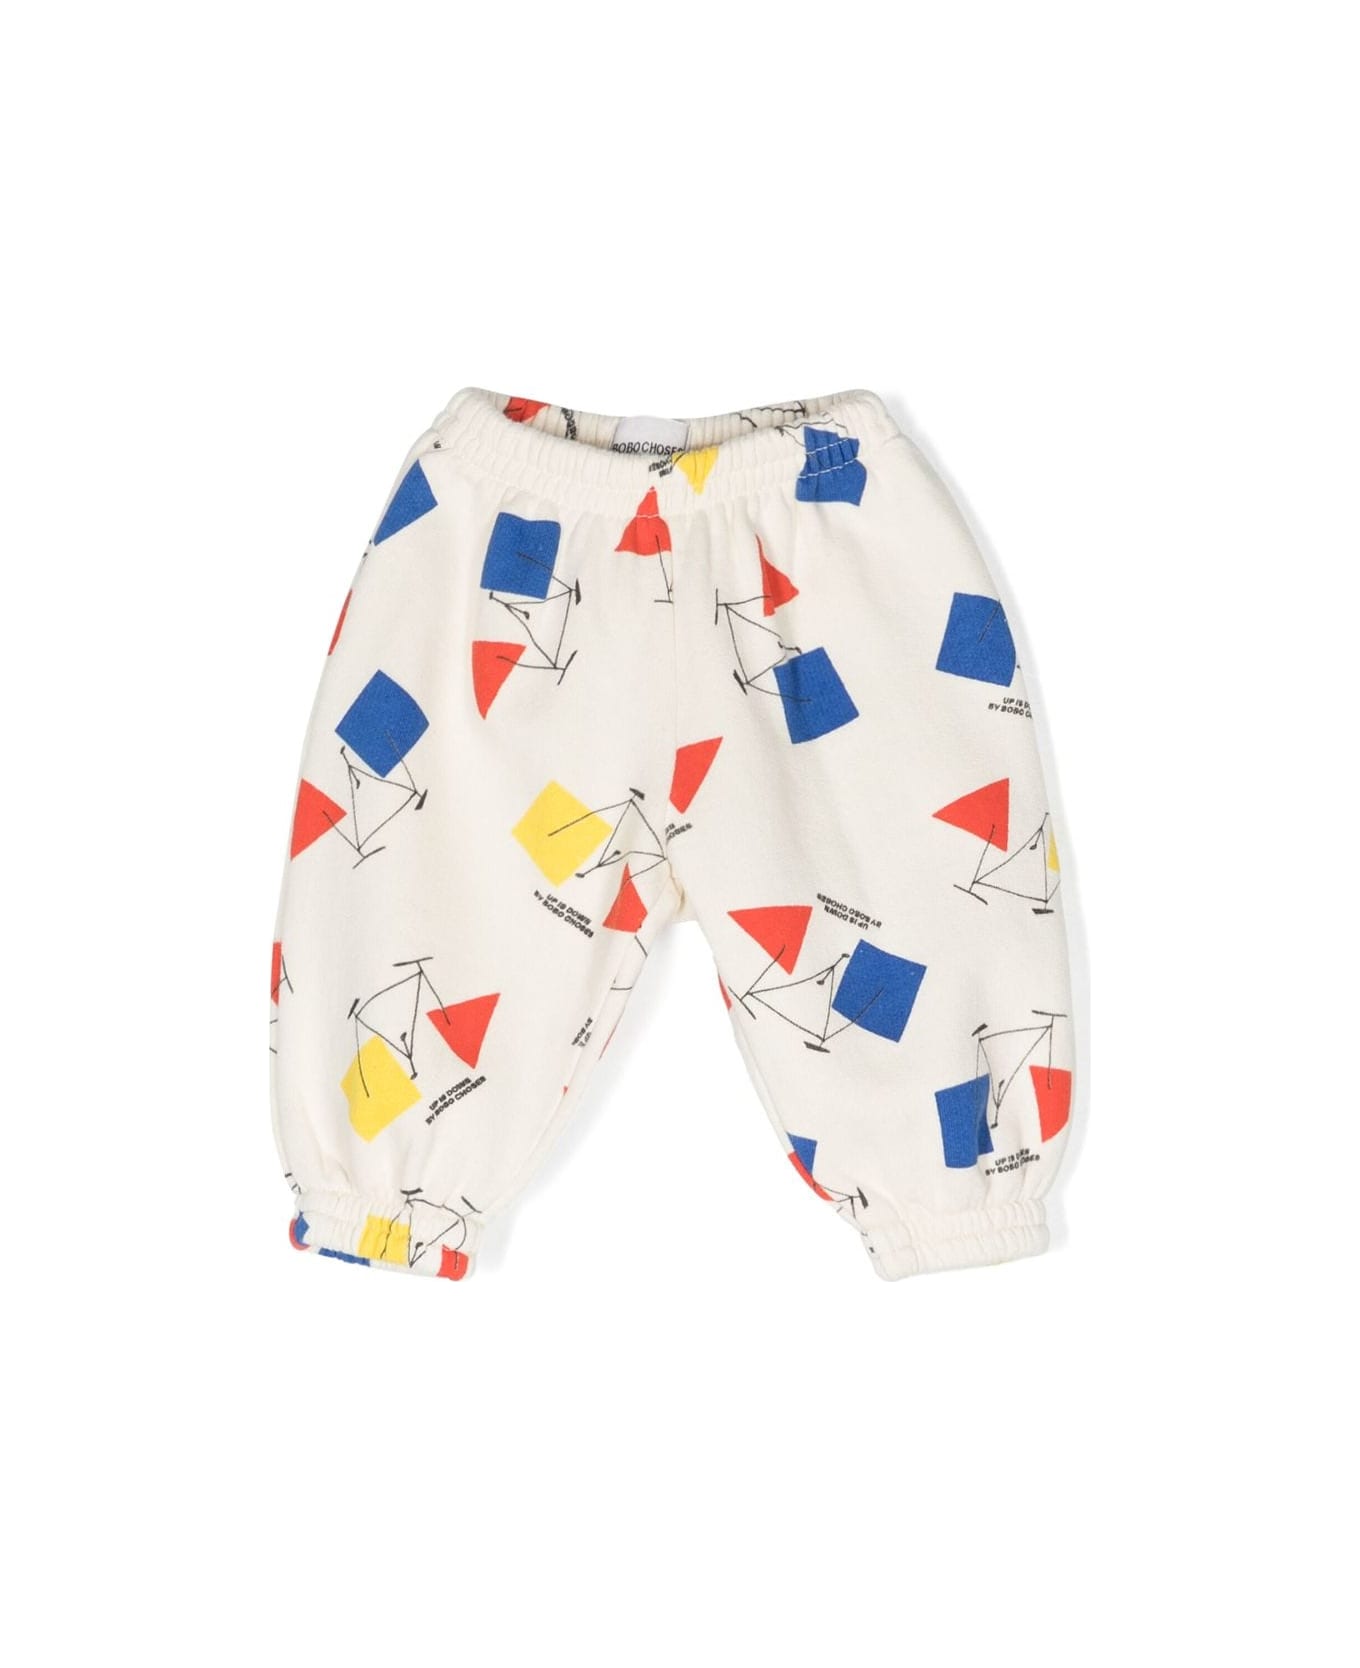 Bobo Choses Baby Crazy Bicy All Over Jogging Pants - White